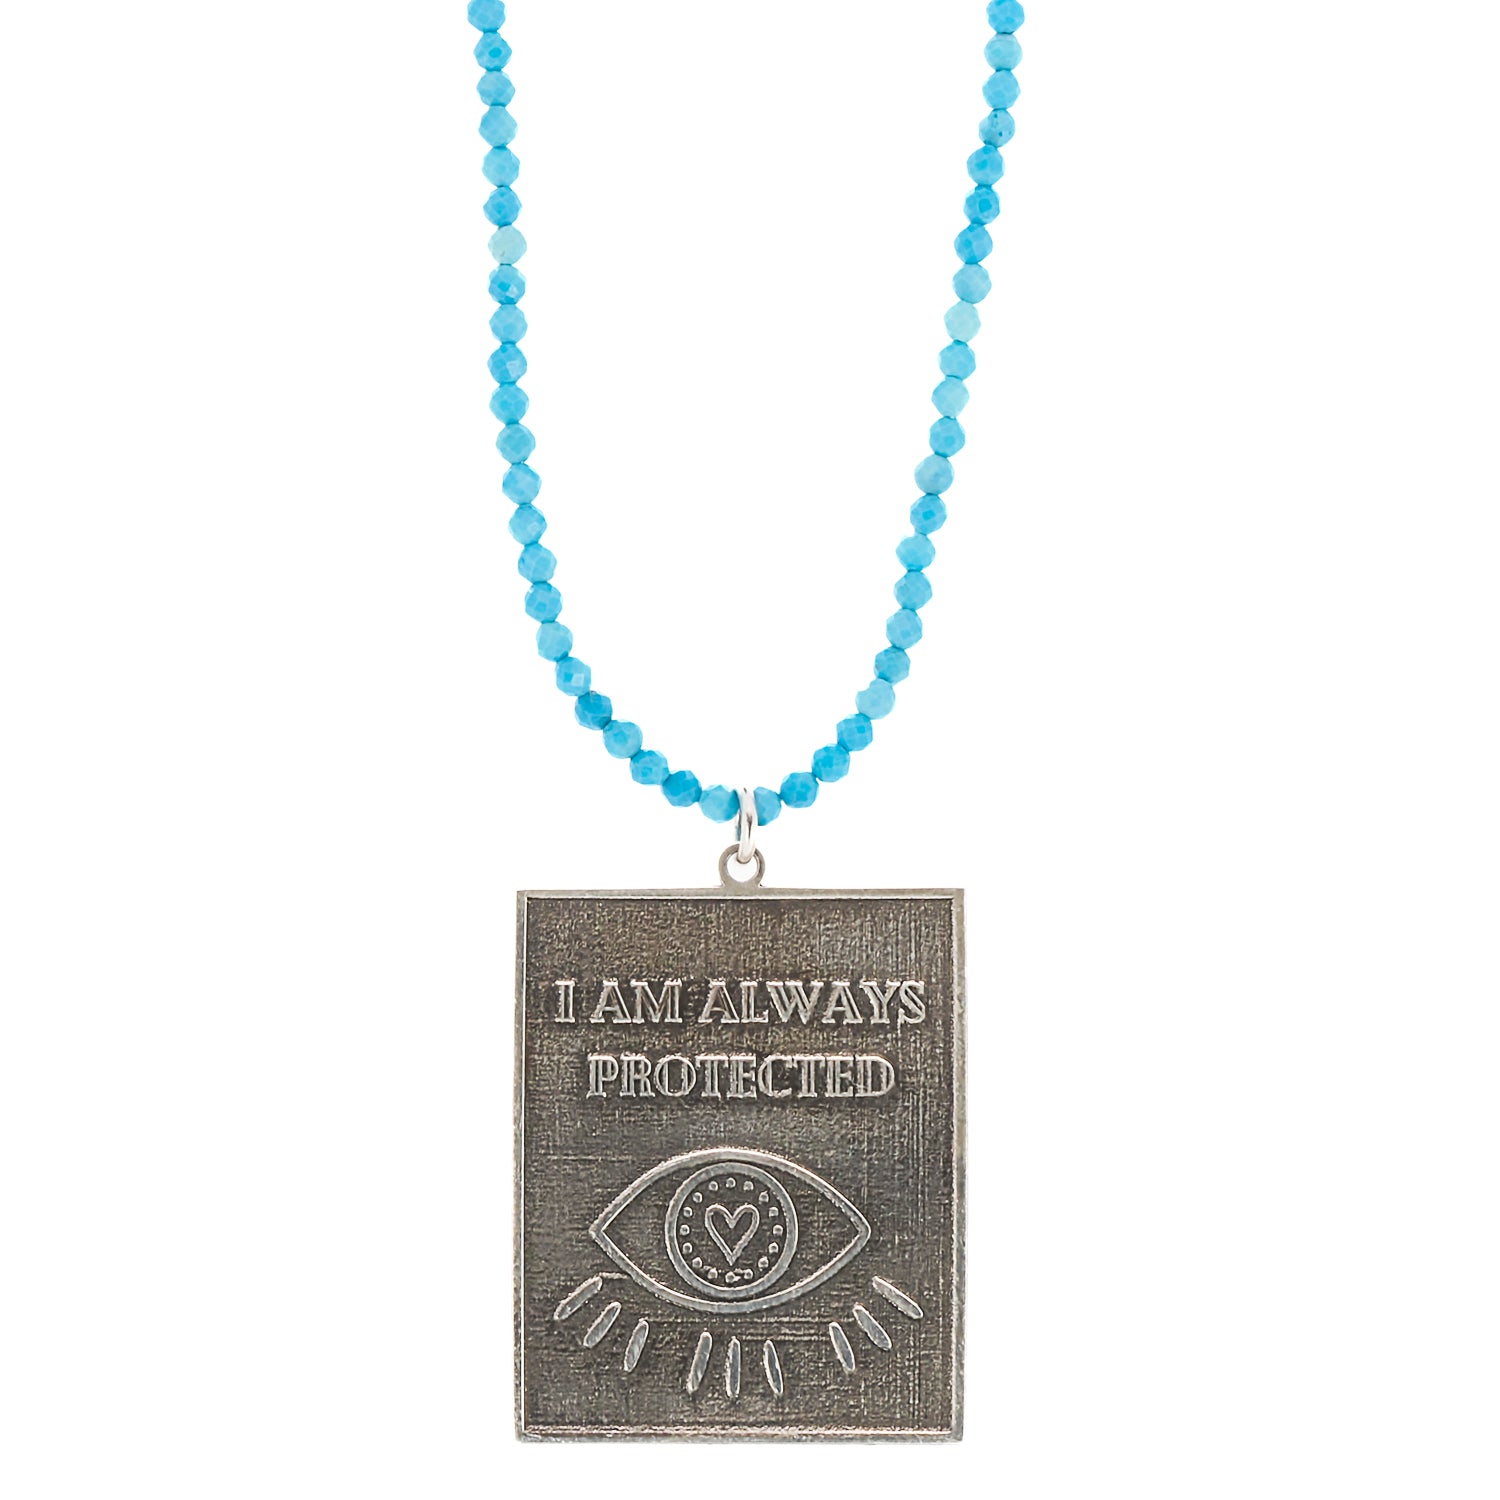 A close-up of the Turquoise 'I Am Always Protected' Necklace, showcasing its vibrant turquoise stone